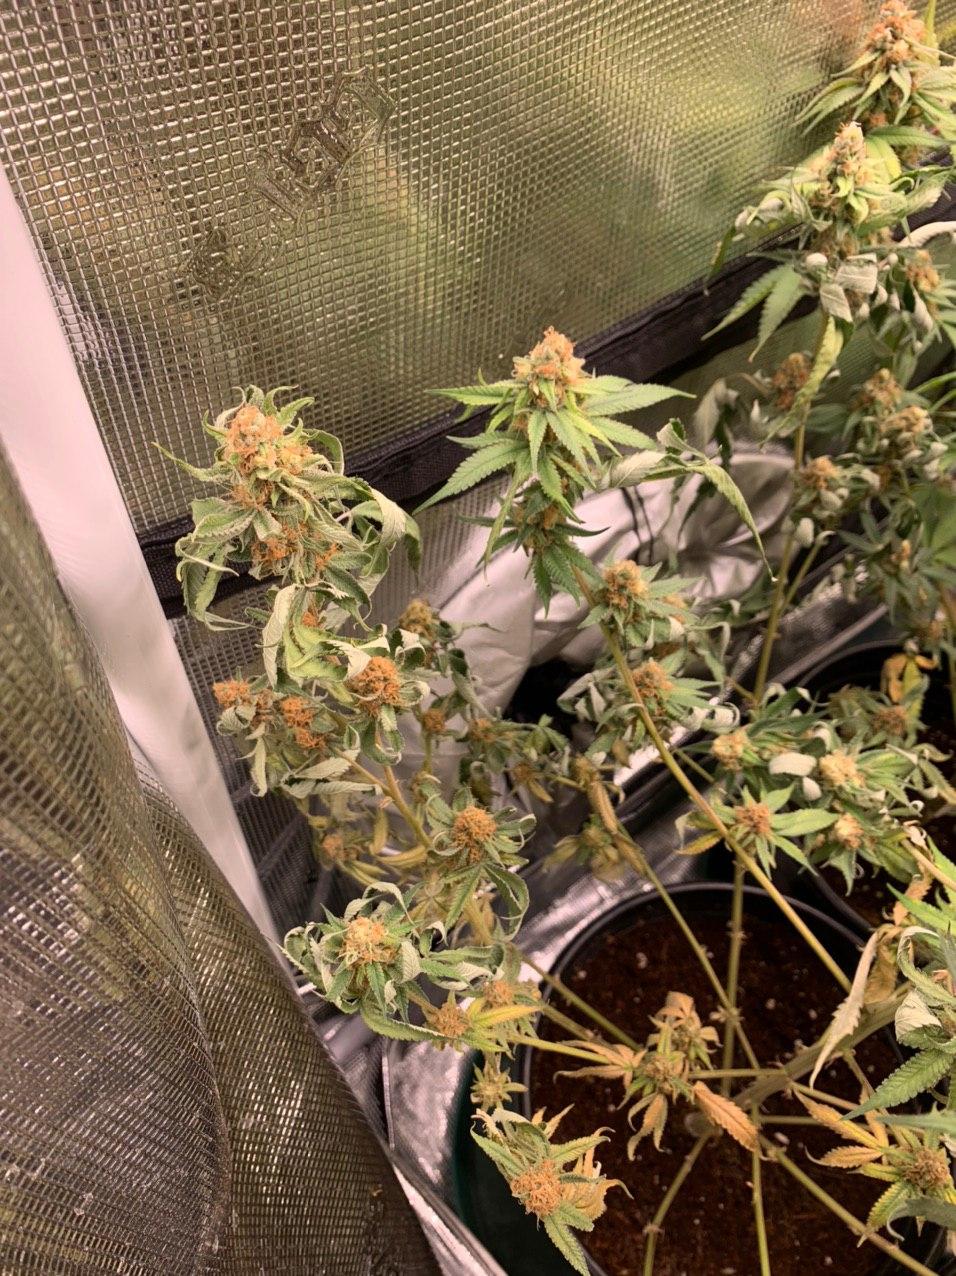 What could be the problem 1st grow week 5 of flower